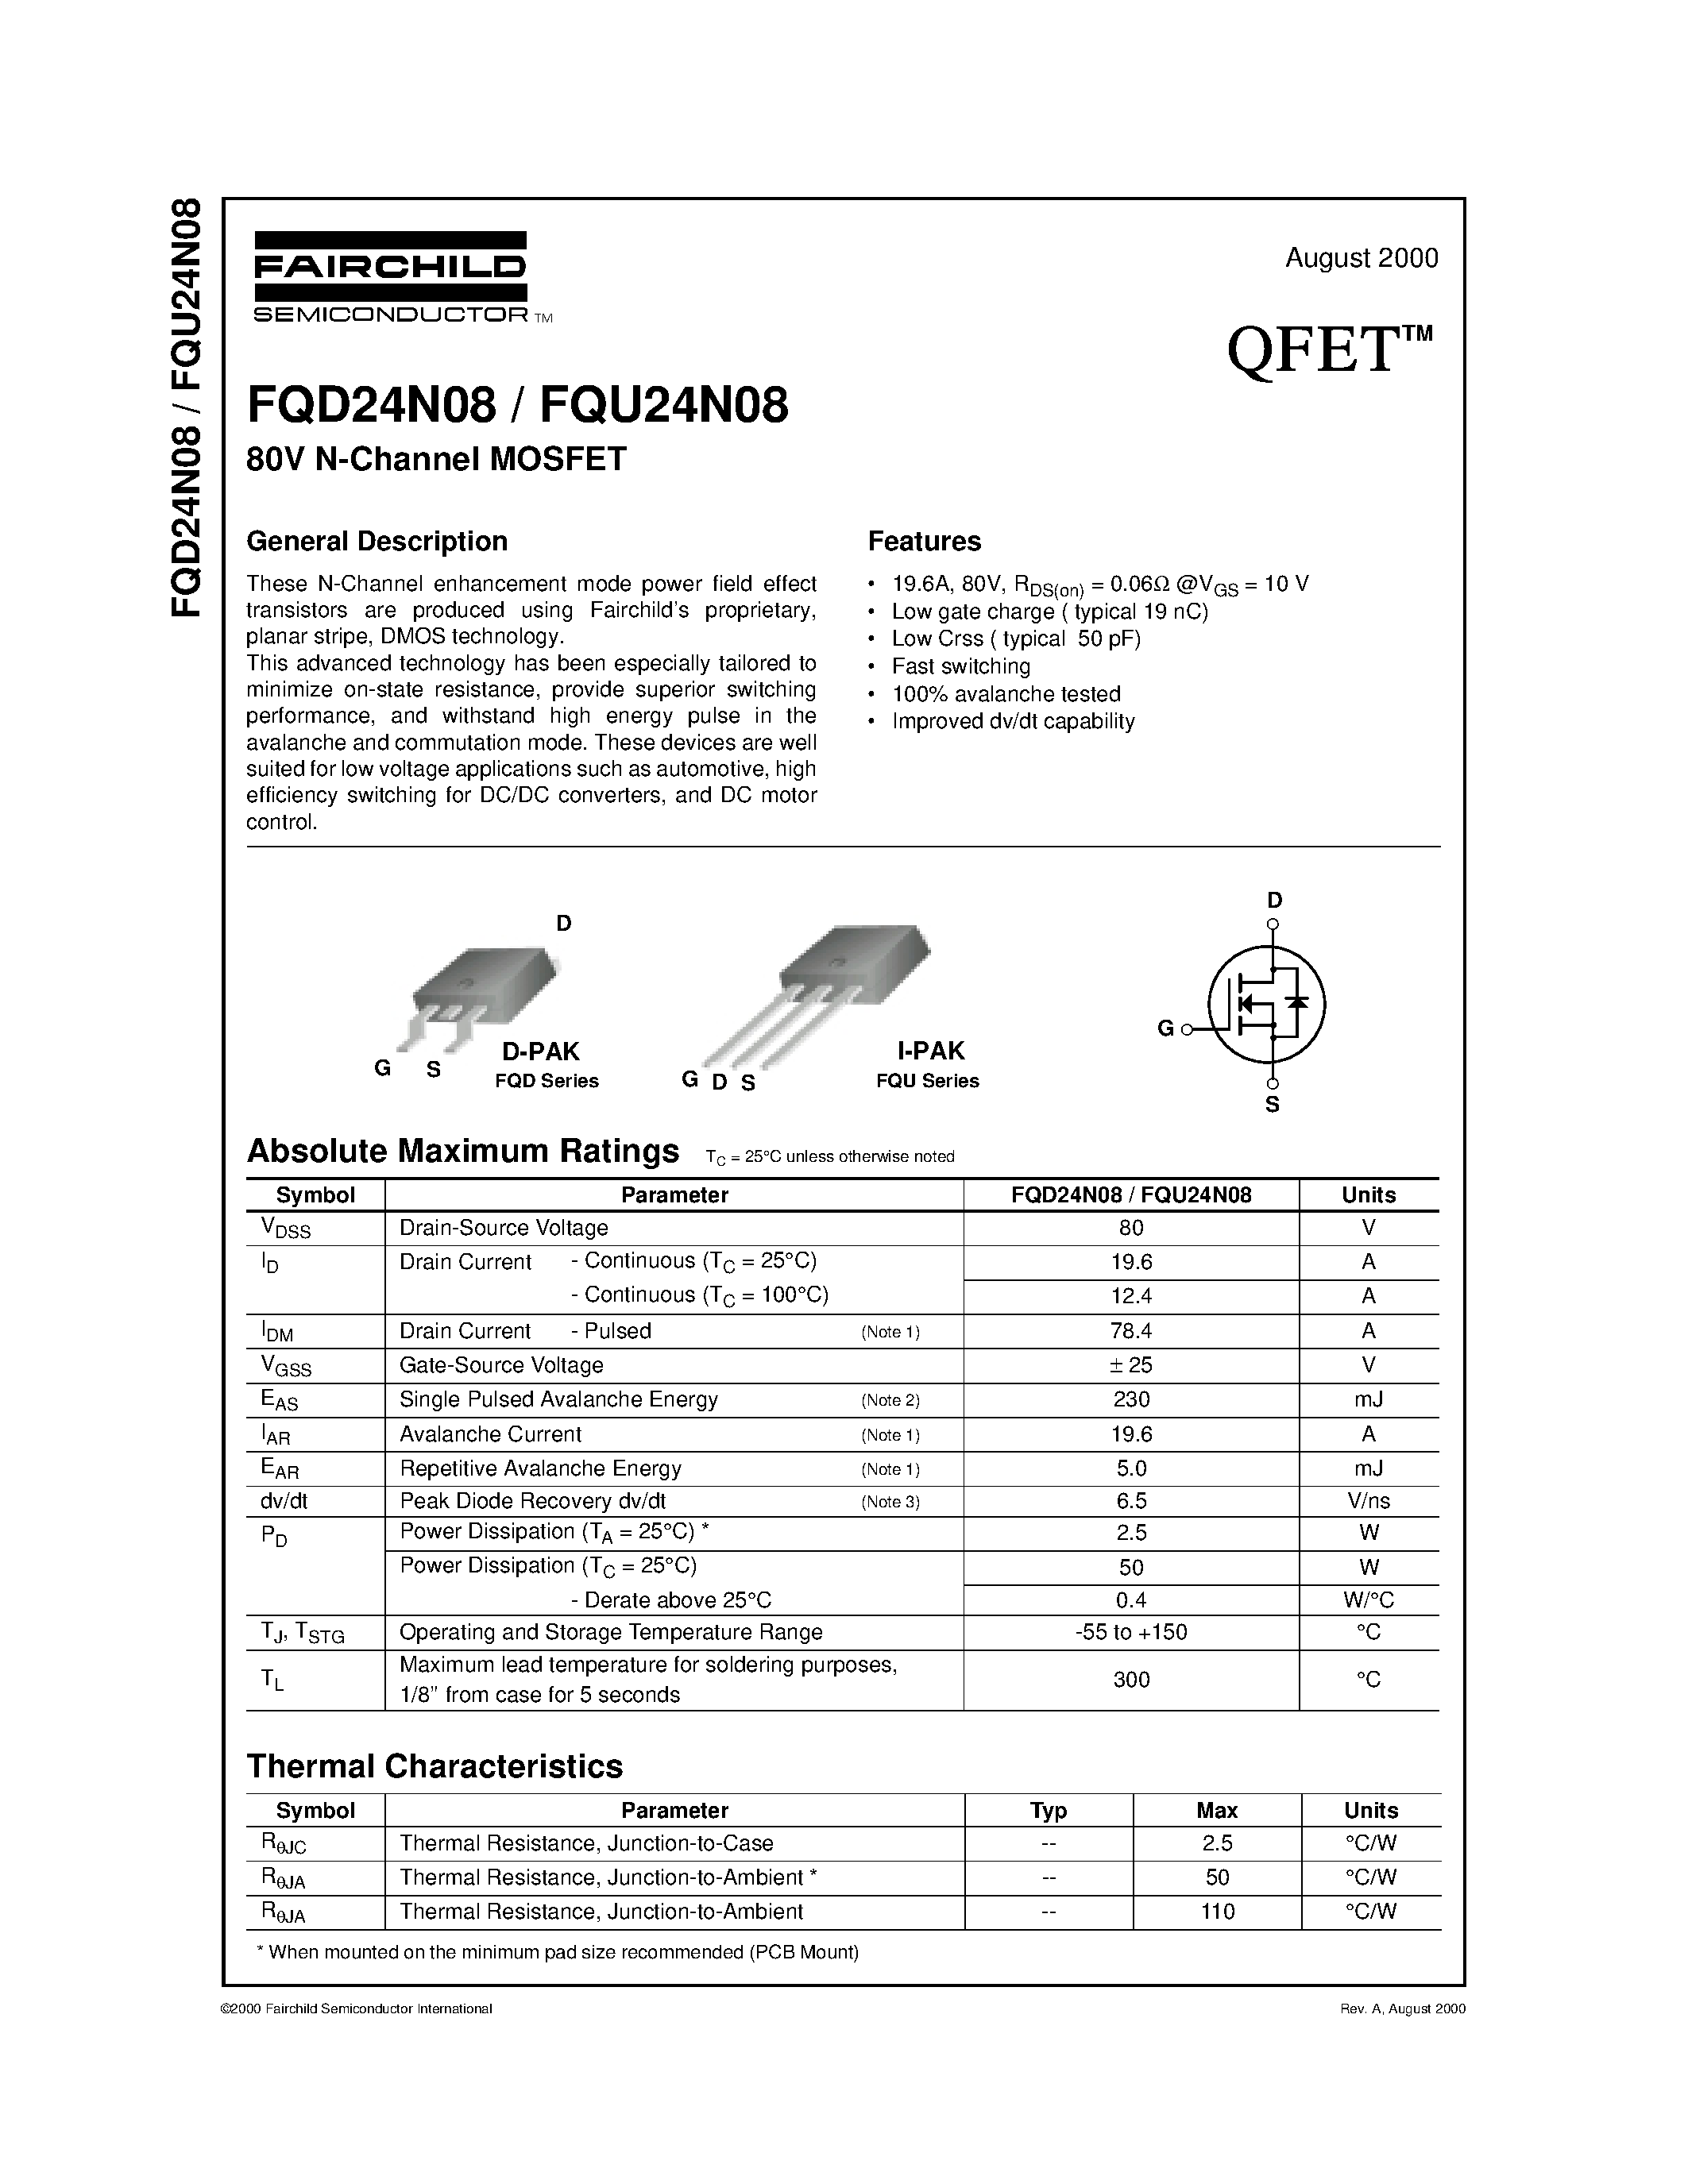 Datasheet FQD24N08 - 80V N-Channel MOSFET page 1